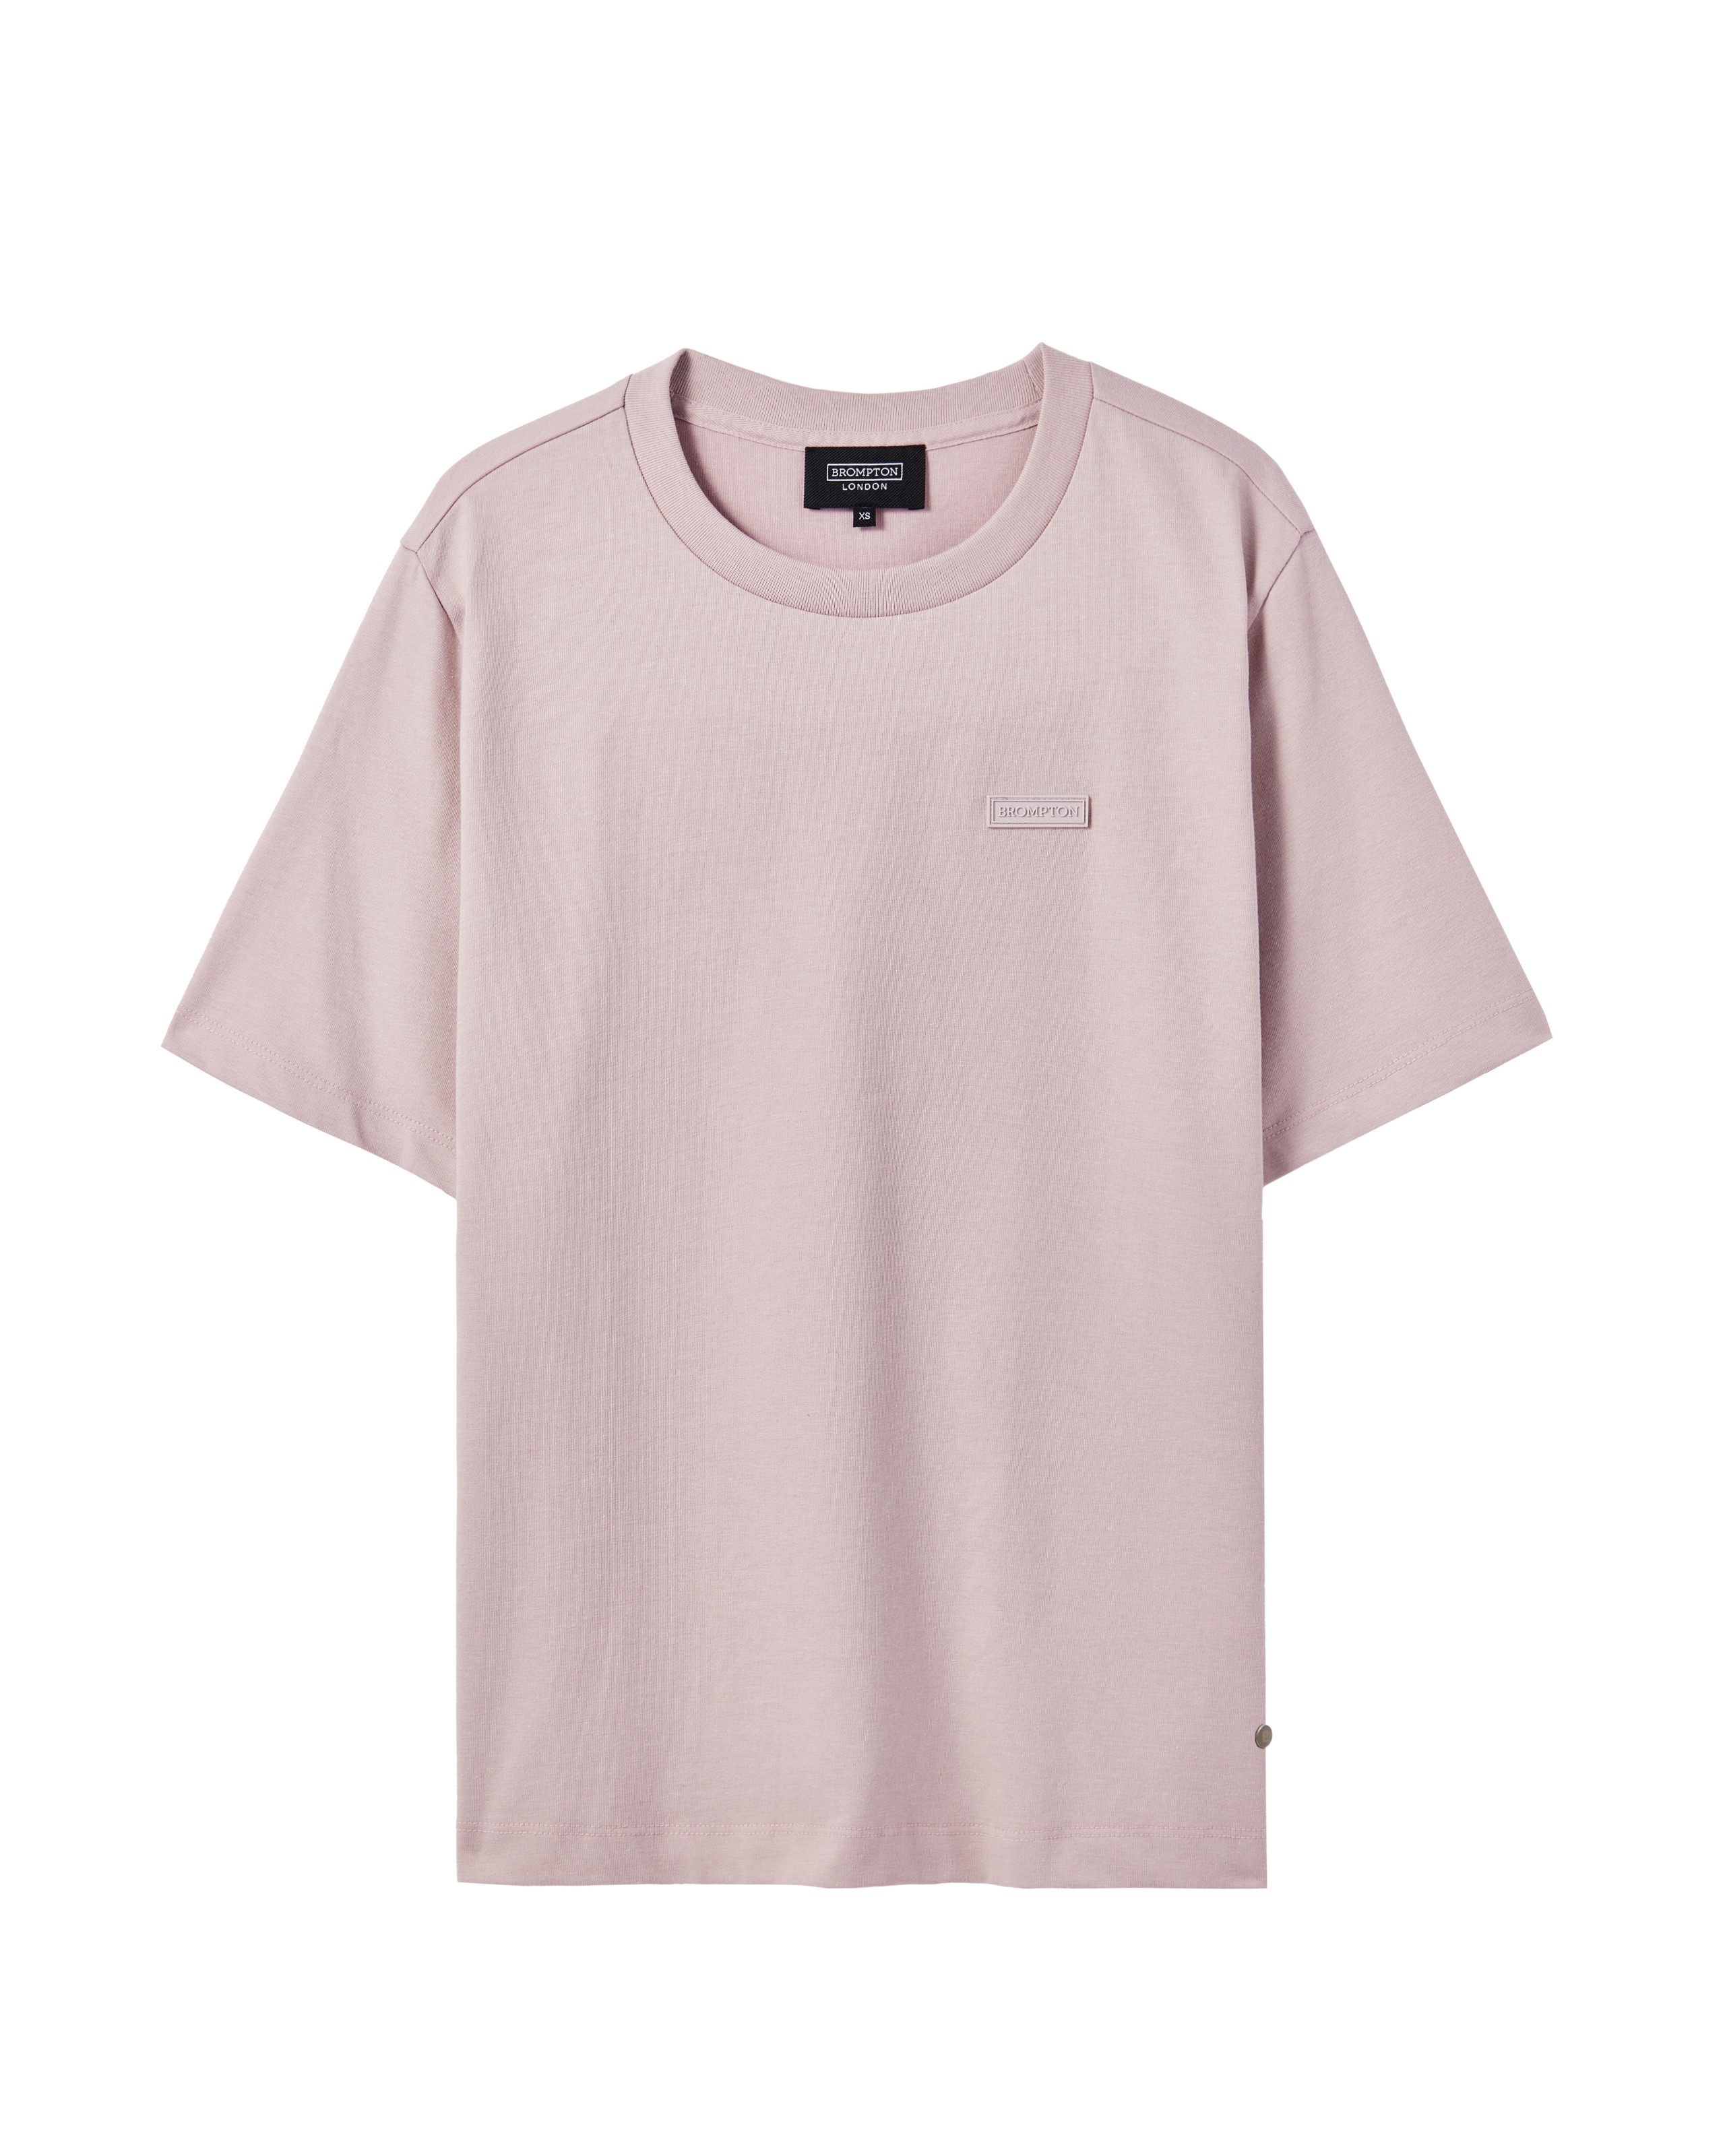 W BACK LETTERING T-SHIRT - PINK